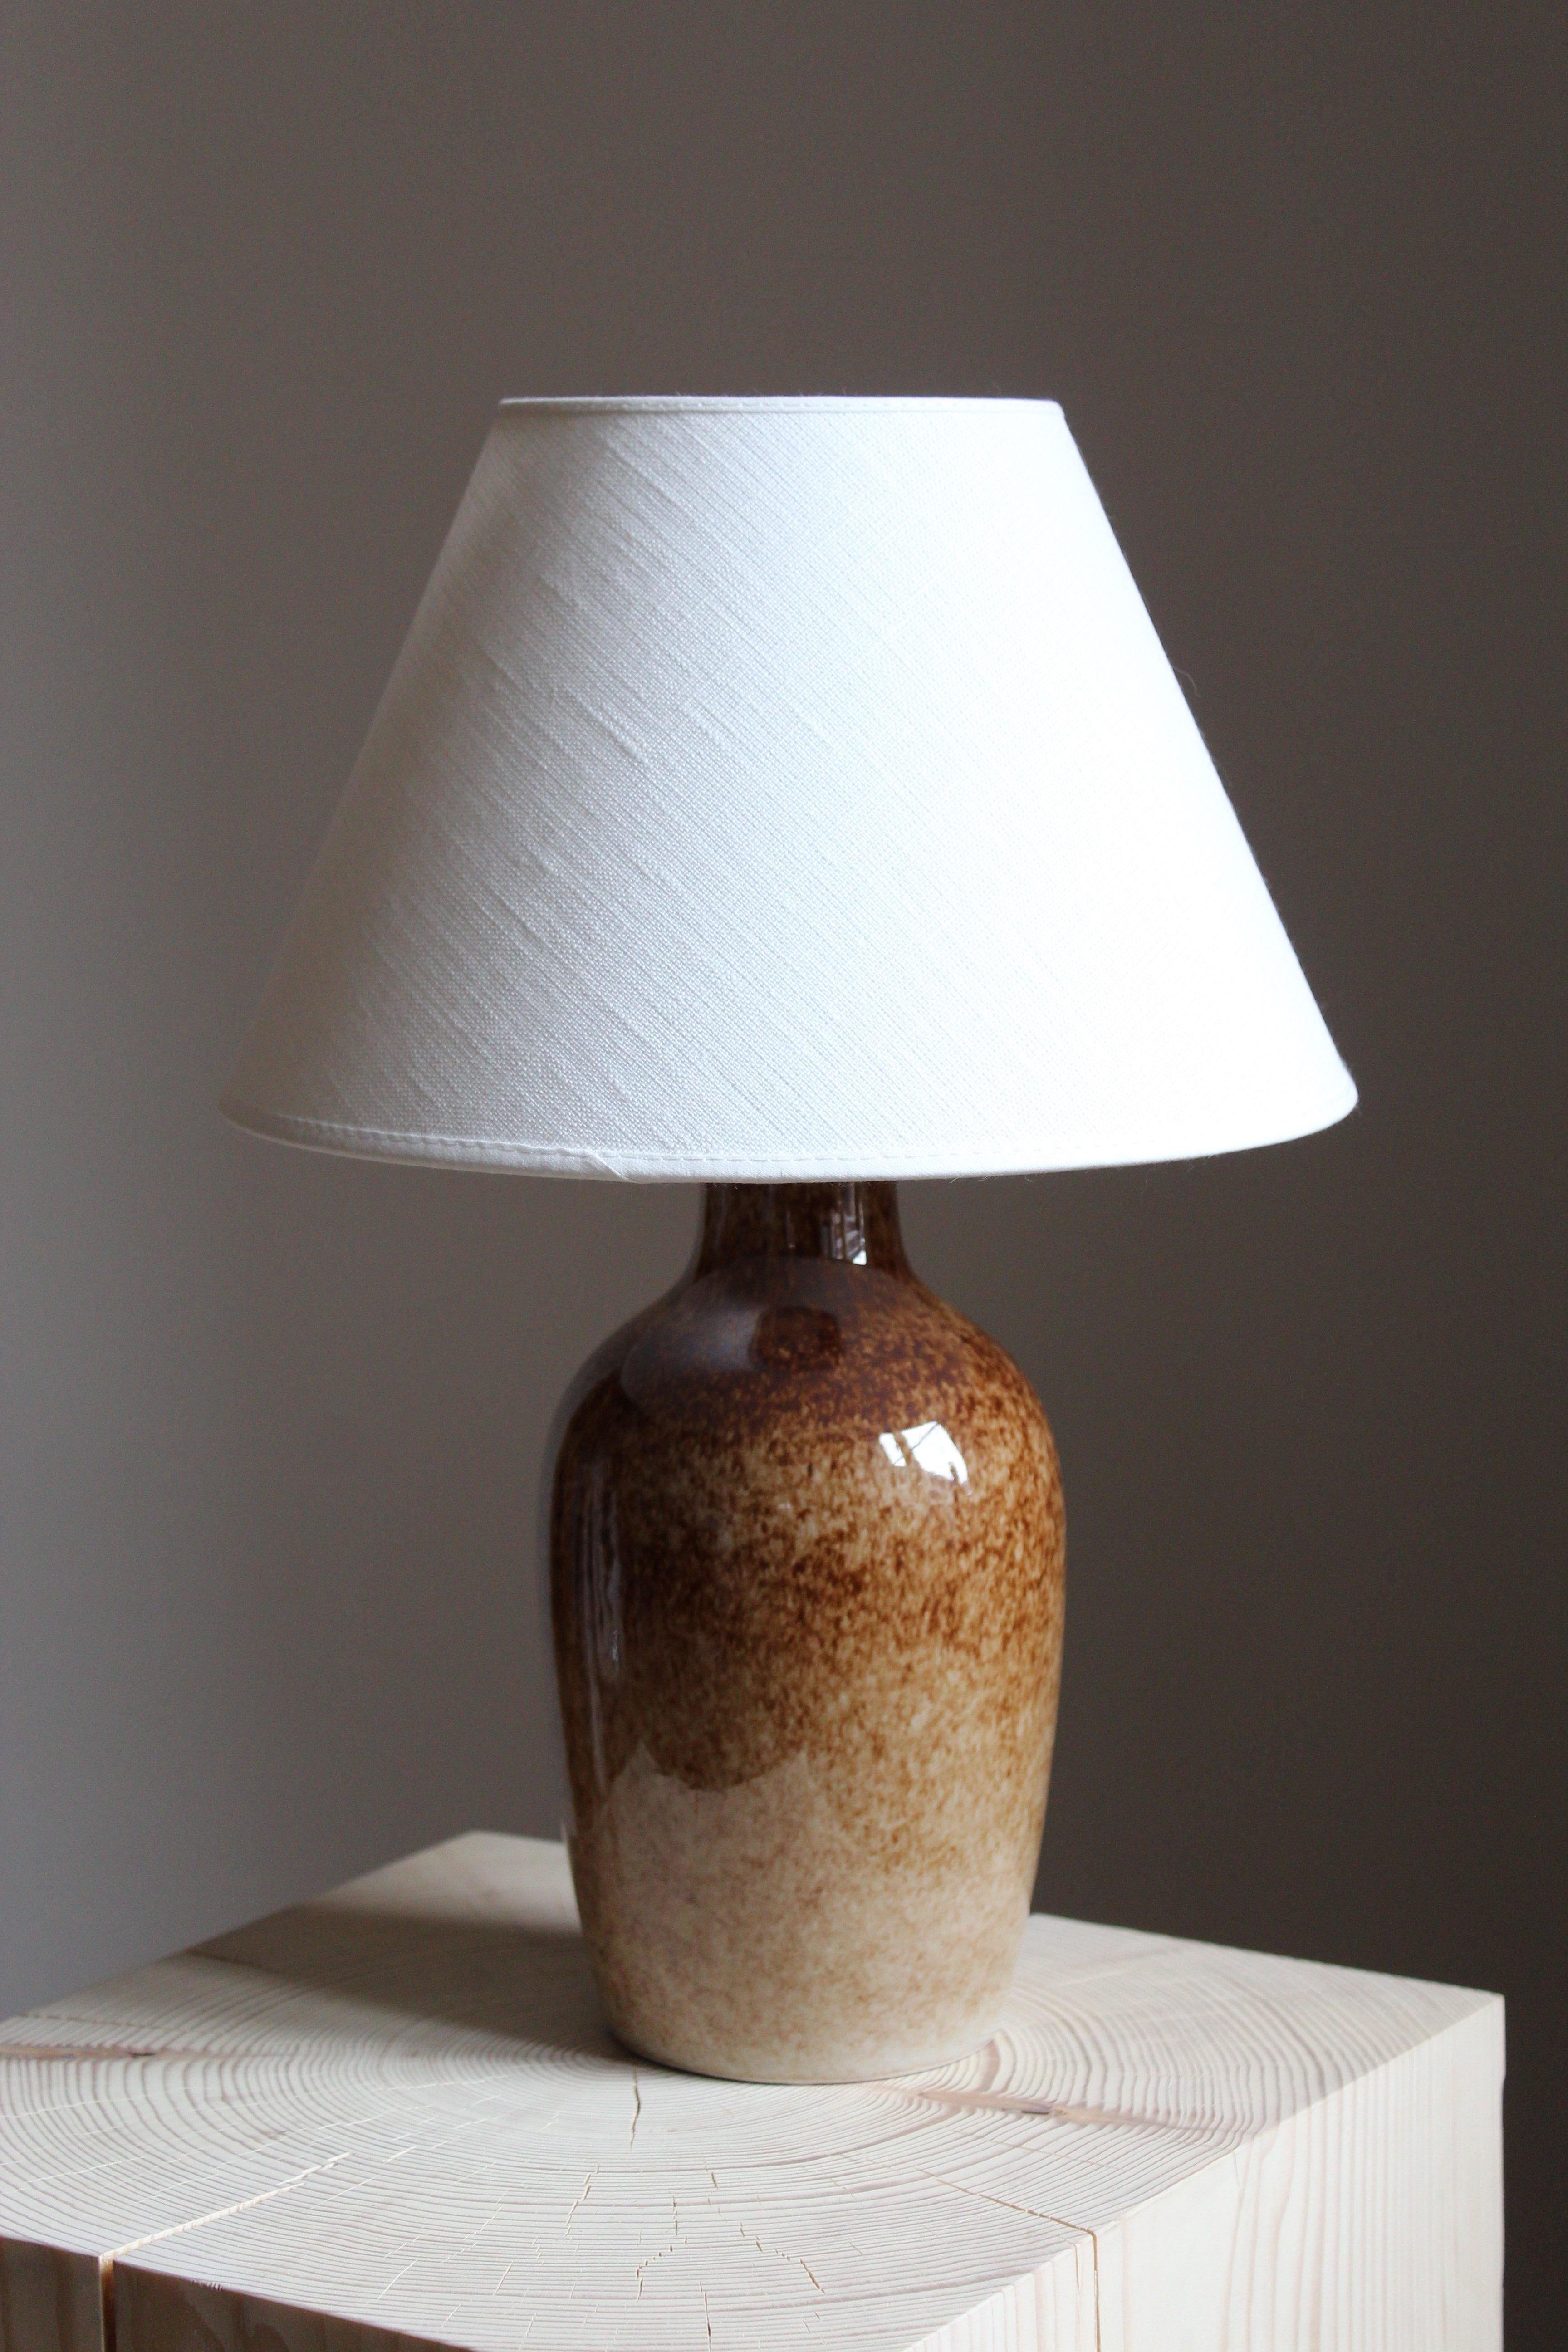 A table lamp by Carl-Harry Stålhane and potter Kent Eriksson, for Carl-Harry Stålhanes own studio, Designhuset, Sweden. Signed. Sold without lampshade.

Glaze features brown-beige colors.

Other ceramicists of the period include Berndt Friberg, Axel